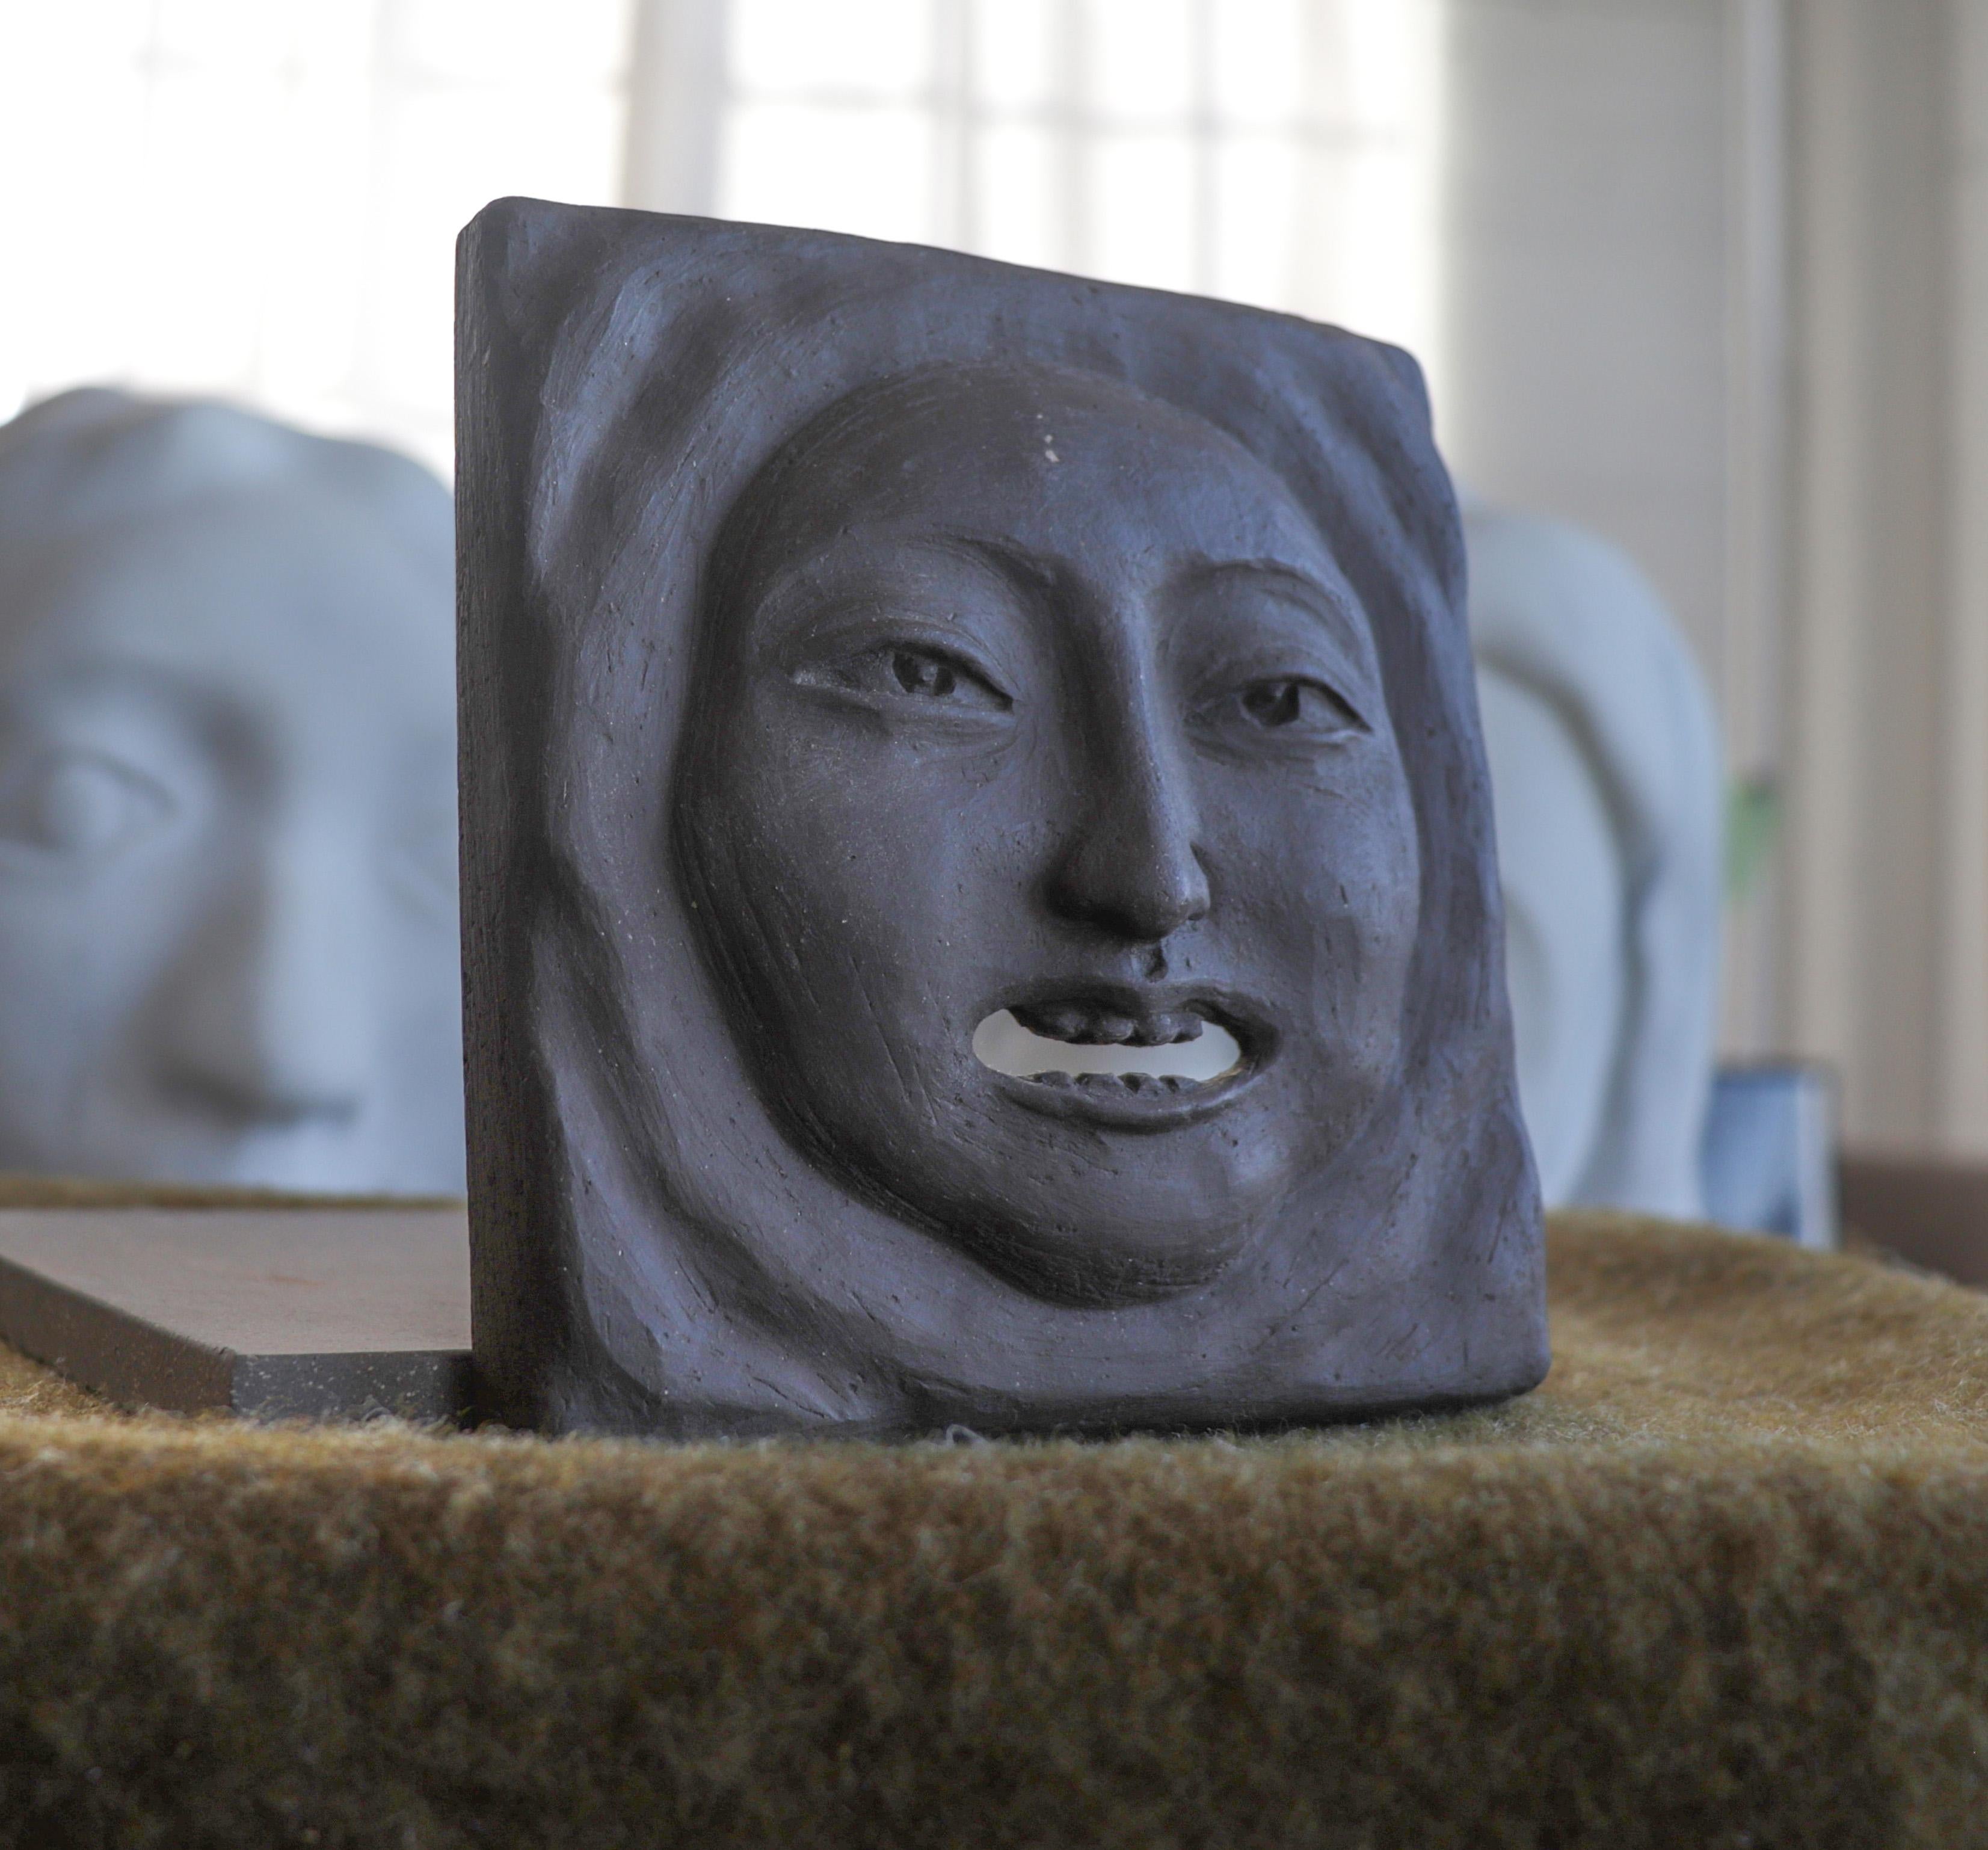 This grinning face tile is by Korean sculptor Yeon Koh Warner (b. 1967). Warner was born in Seoul, South Korea in 1967. She graduated from Seoul National University in 1990 with a degree in sculpture. In 1991 she moved to Rome to further pursue